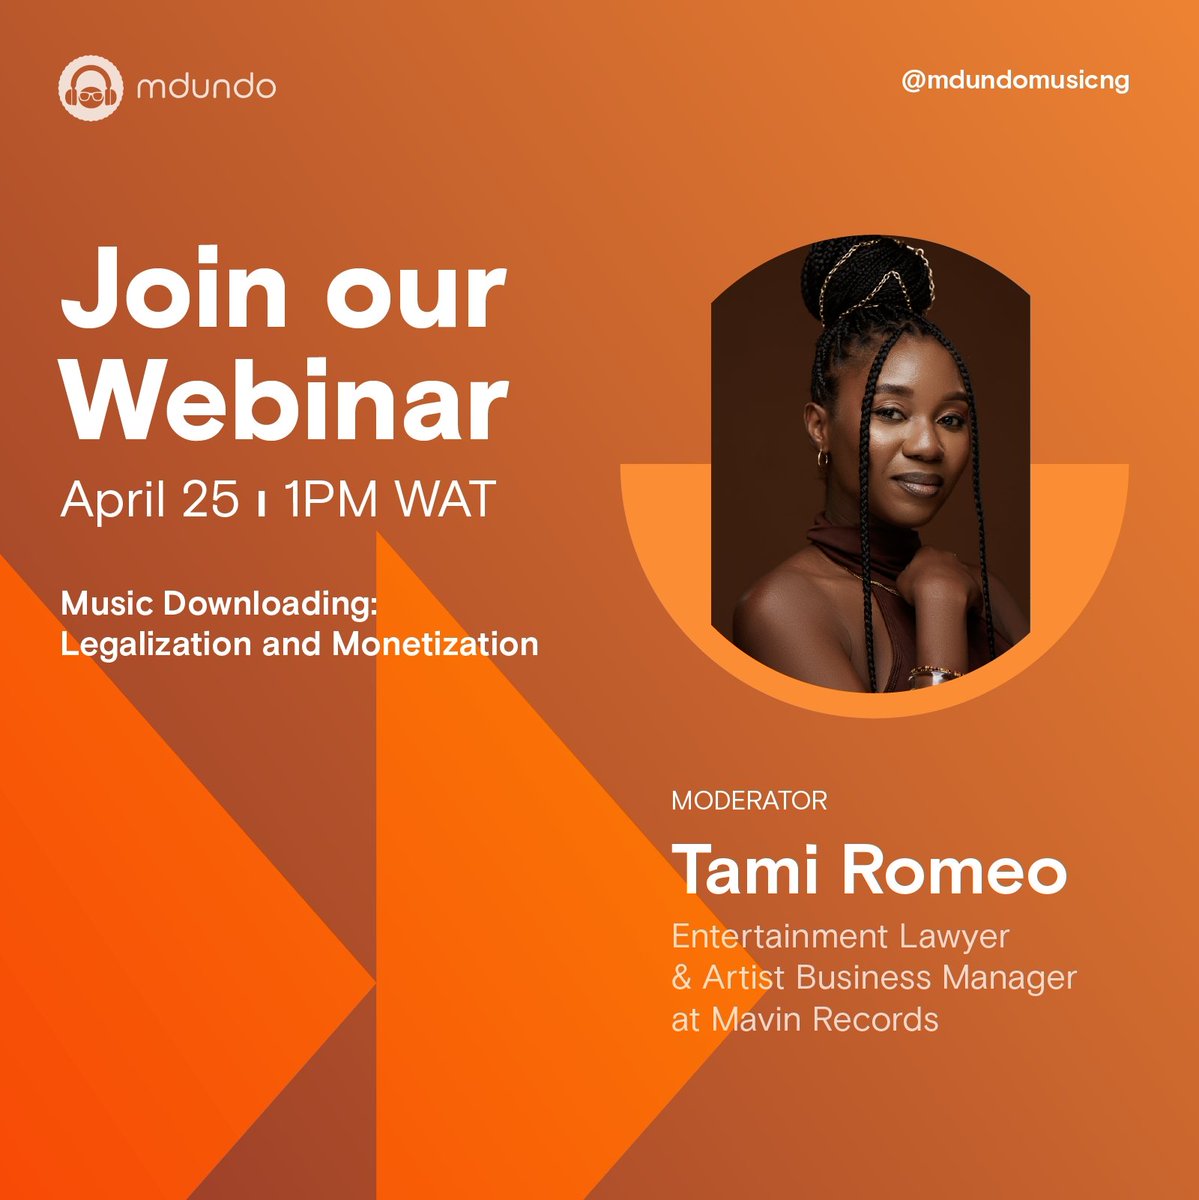 One of the finest entertainment lawyer in the industry Tami Remeo would be moderating the upcoming webinar on Music Downloading; Legalization and Monetization! Tami currently works at Mavin Records as Bayanni’s Business Manager